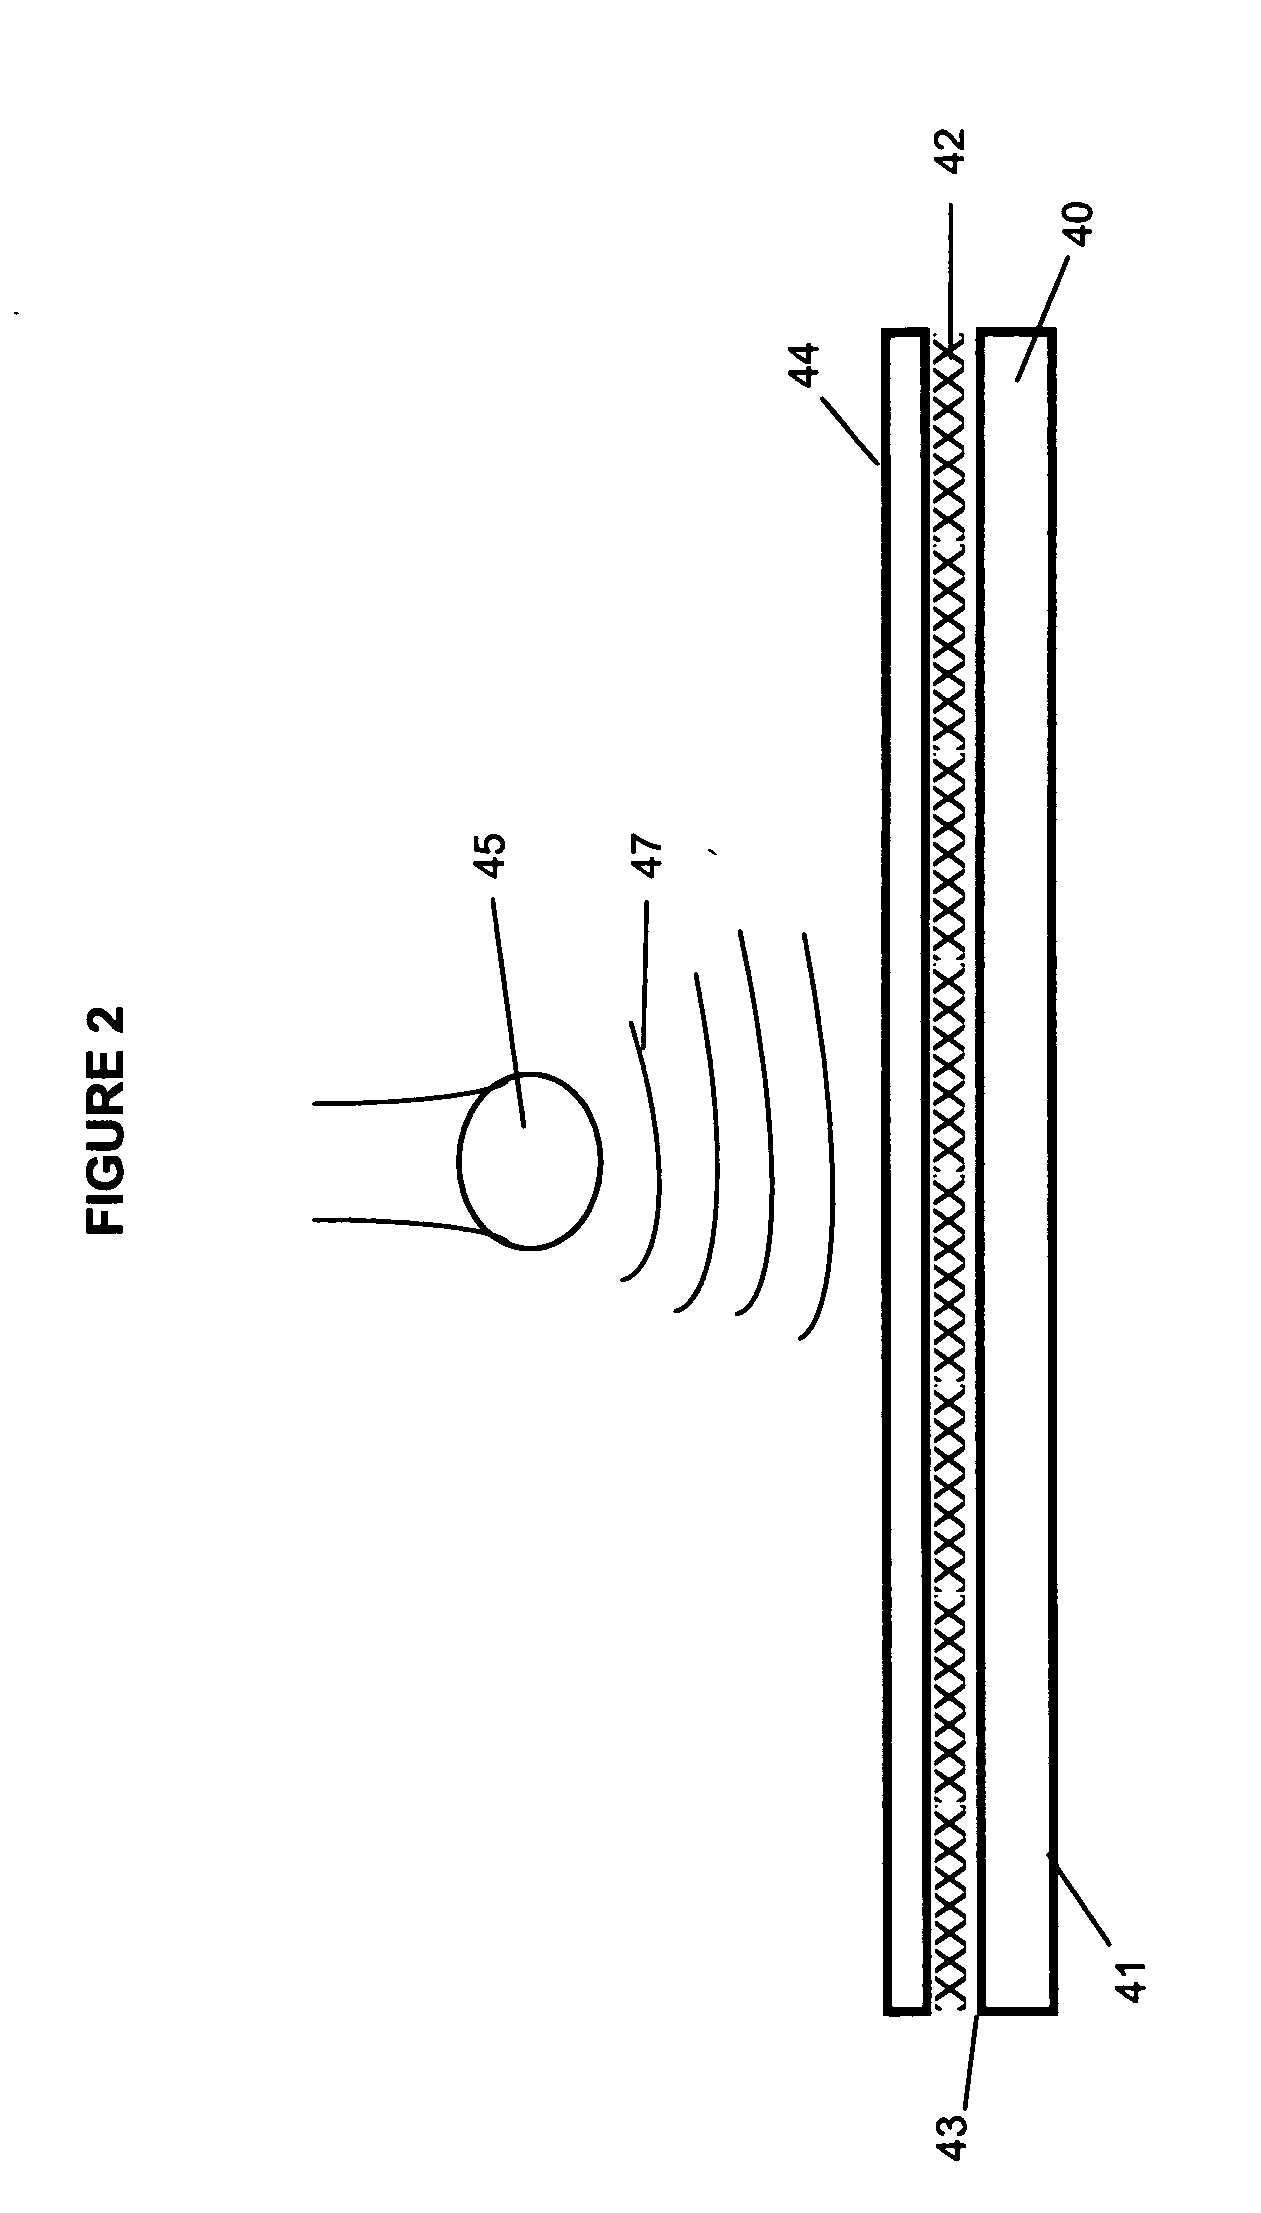 Frangible card carrier with removable layer provided in a temporary laminated assembly